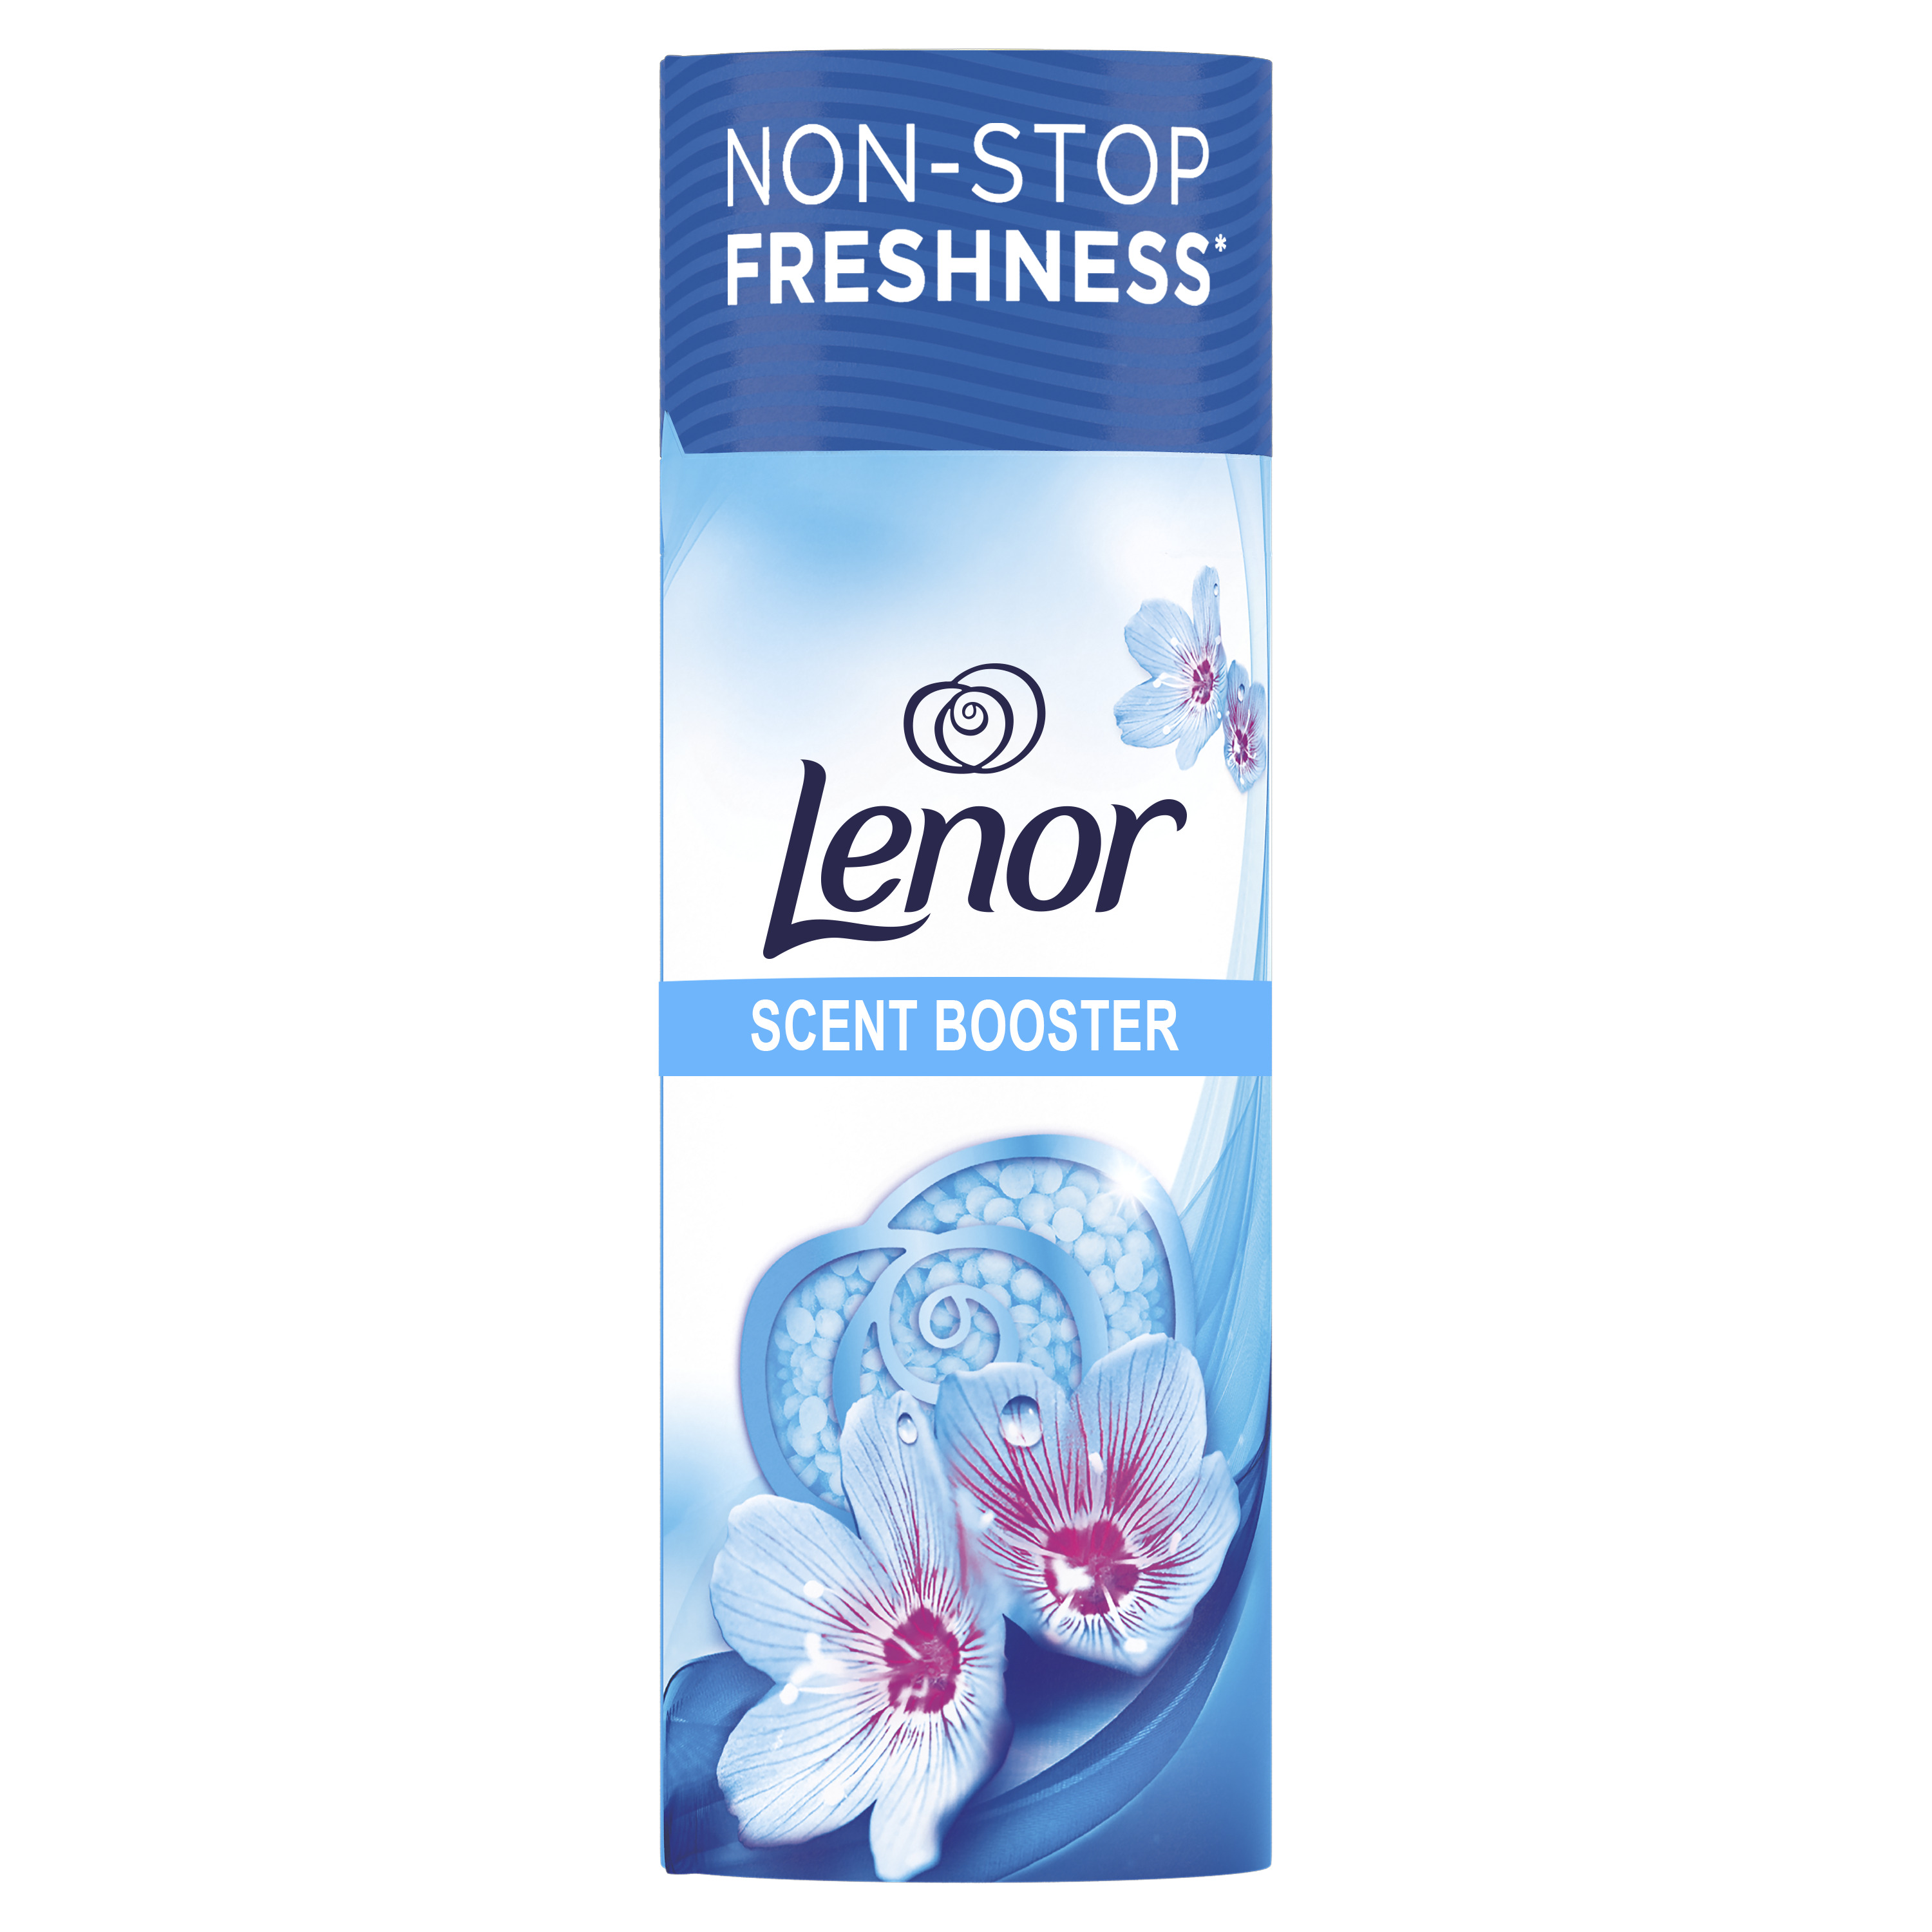 Lenor UK & Ireland - Introducing Uplift, the new scent from Lenor